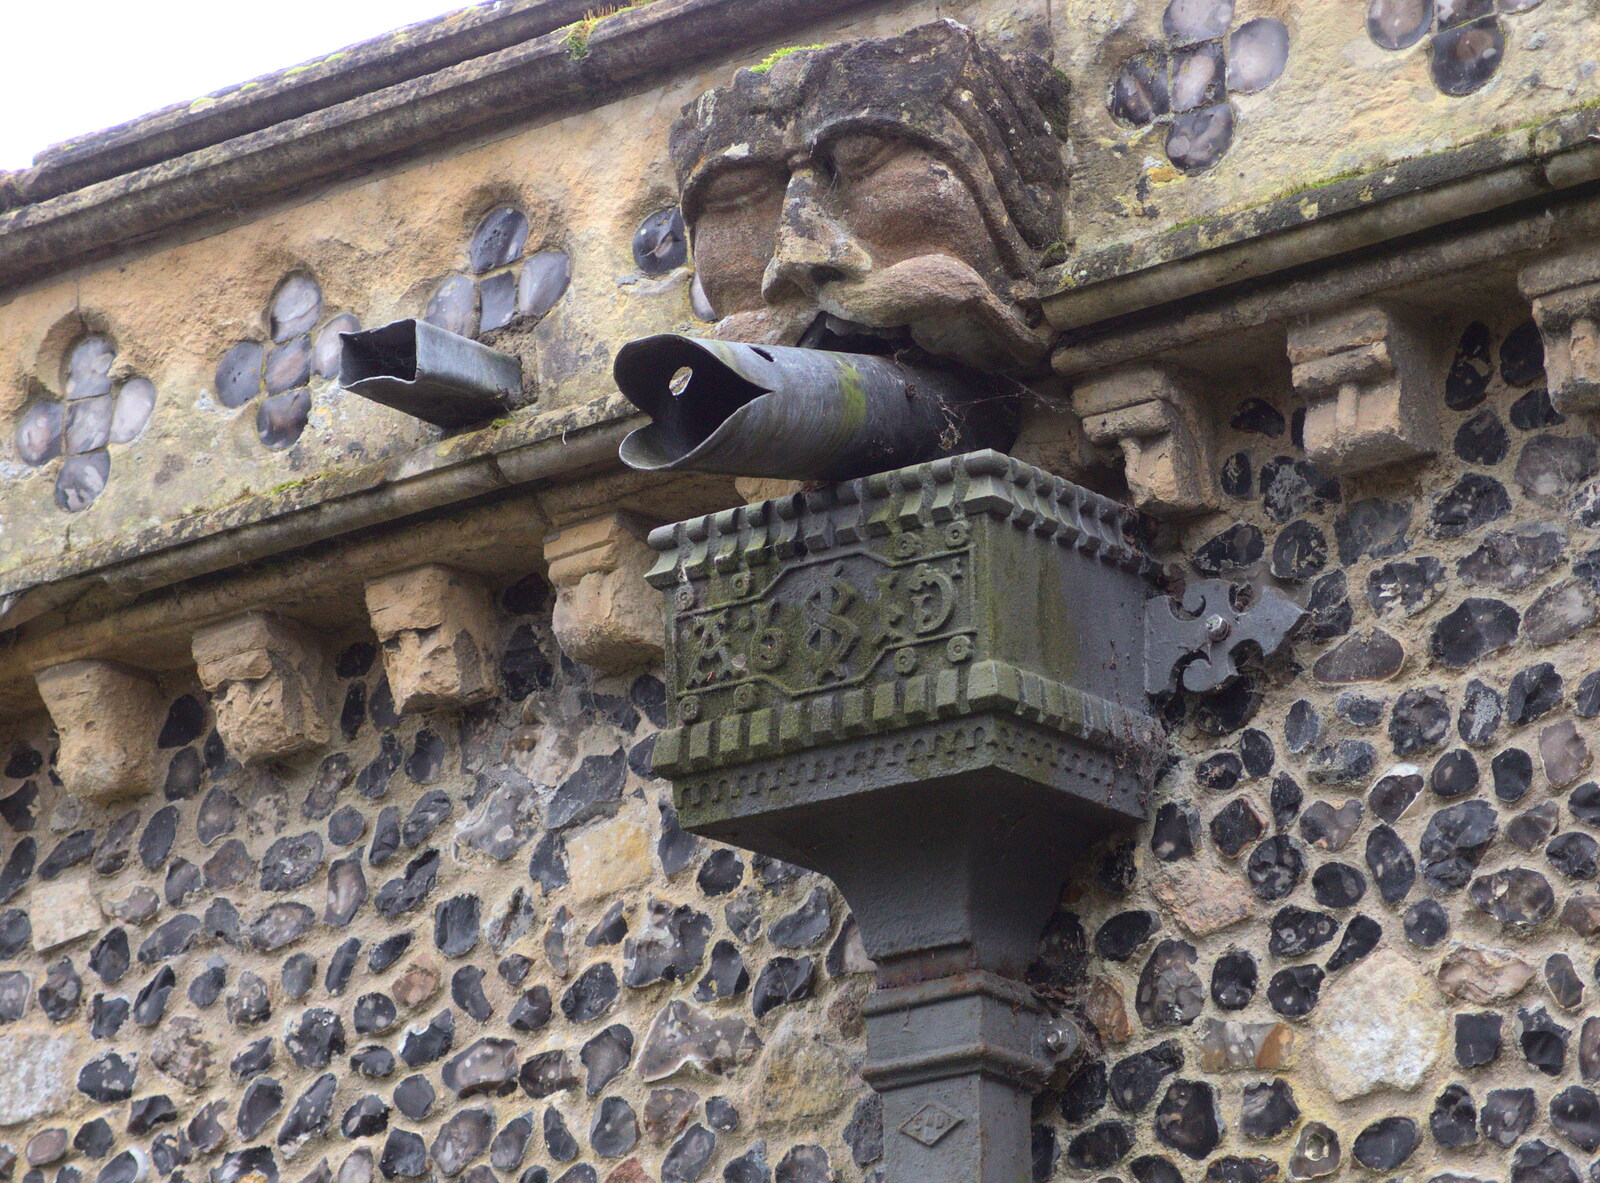 A gargoyle drain pipe from New Year's Eve With The BBs, The Barrel, Banham, Norfolk - 31st December 2015